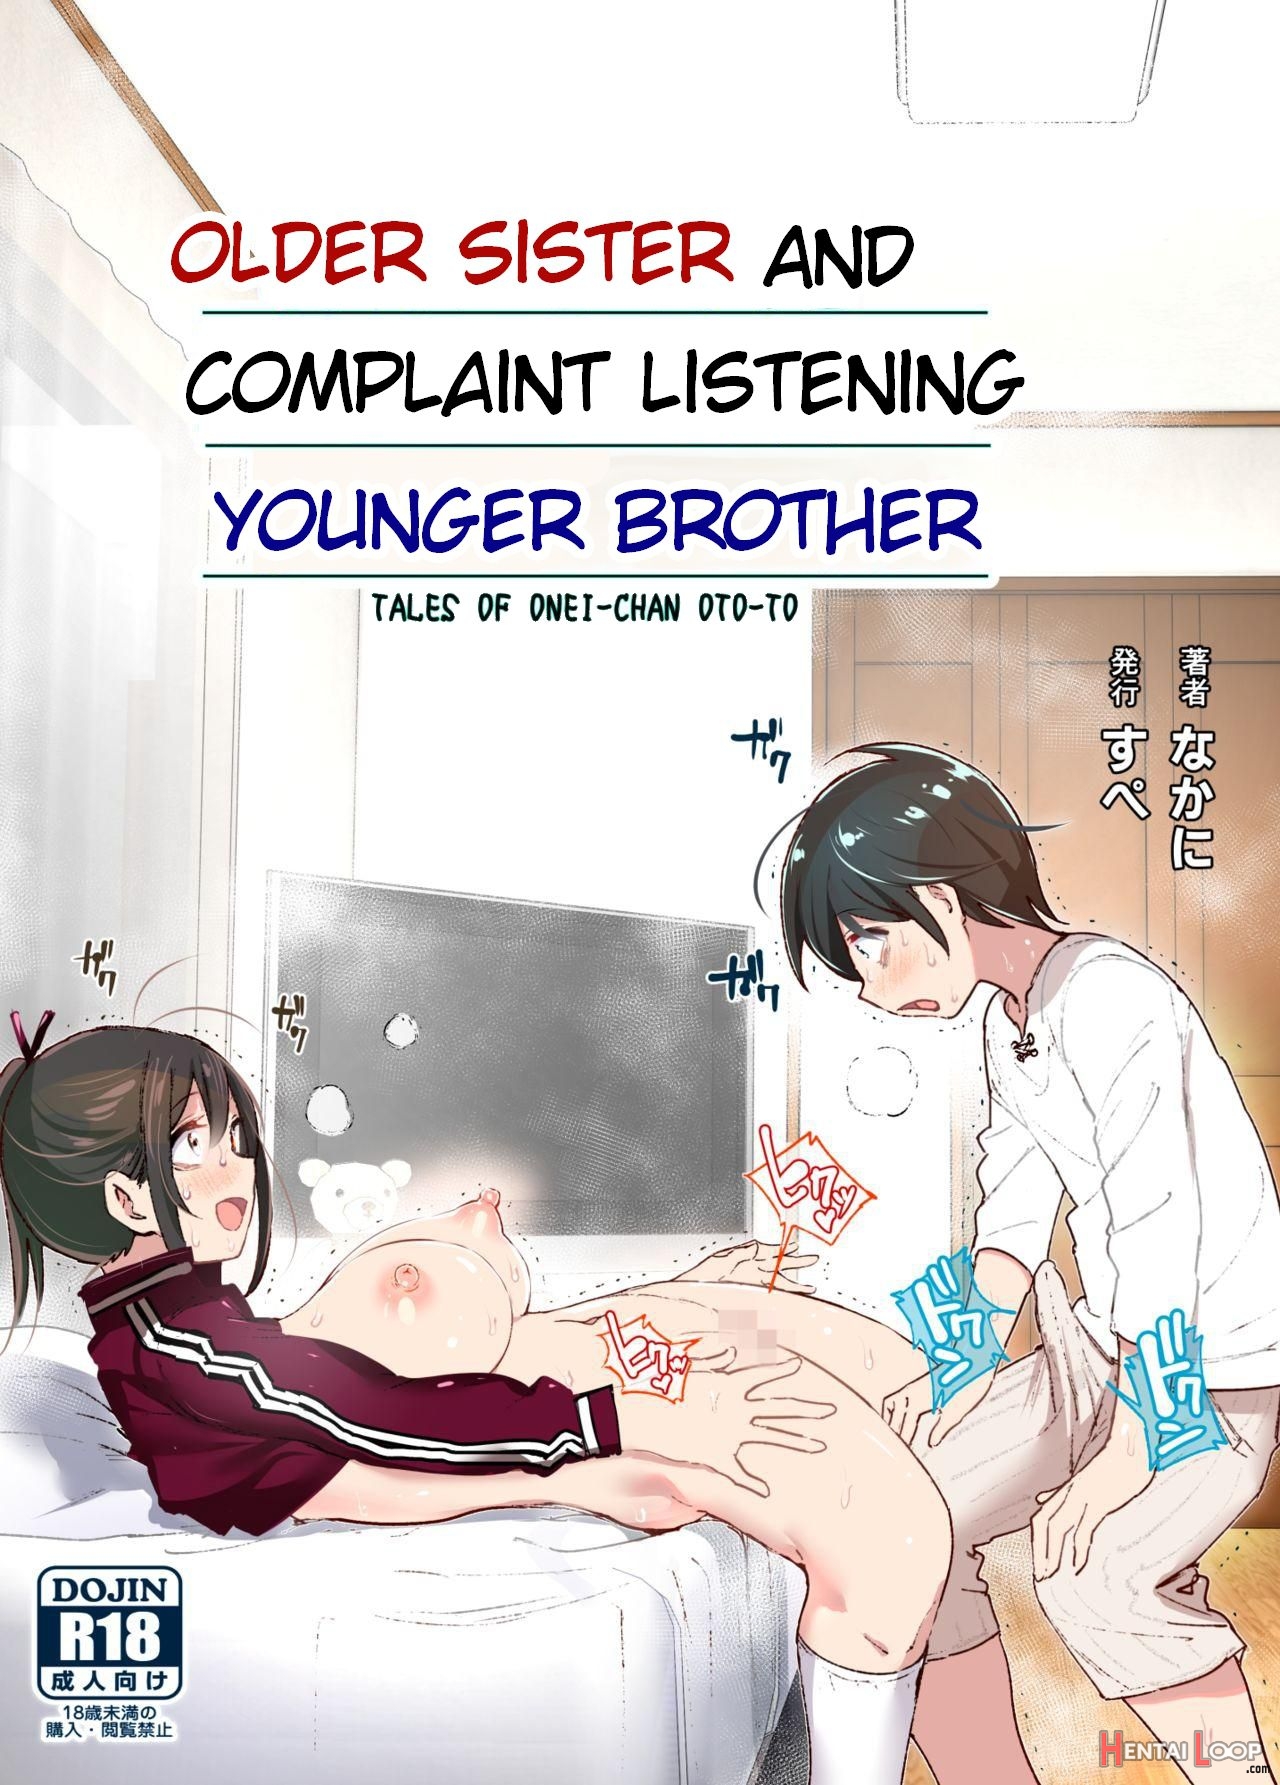 Older Sister And Complaint Listening Younger Brother (by Nakani) - Hentai  doujinshi for free at HentaiLoop